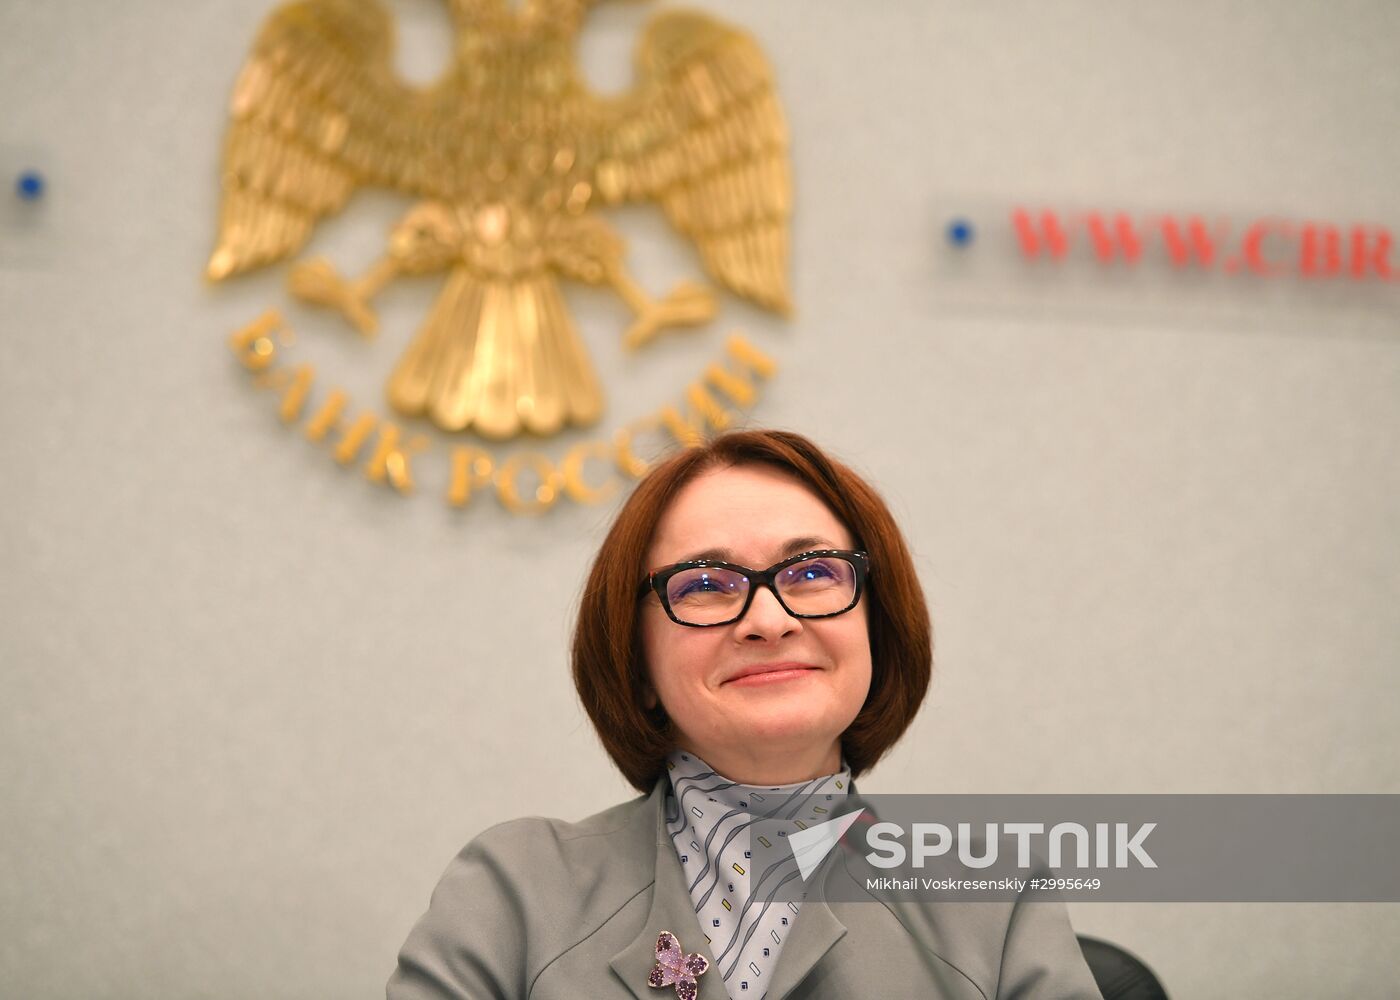 Press conference by Bank of Russia Governor Elvira Nabiullina